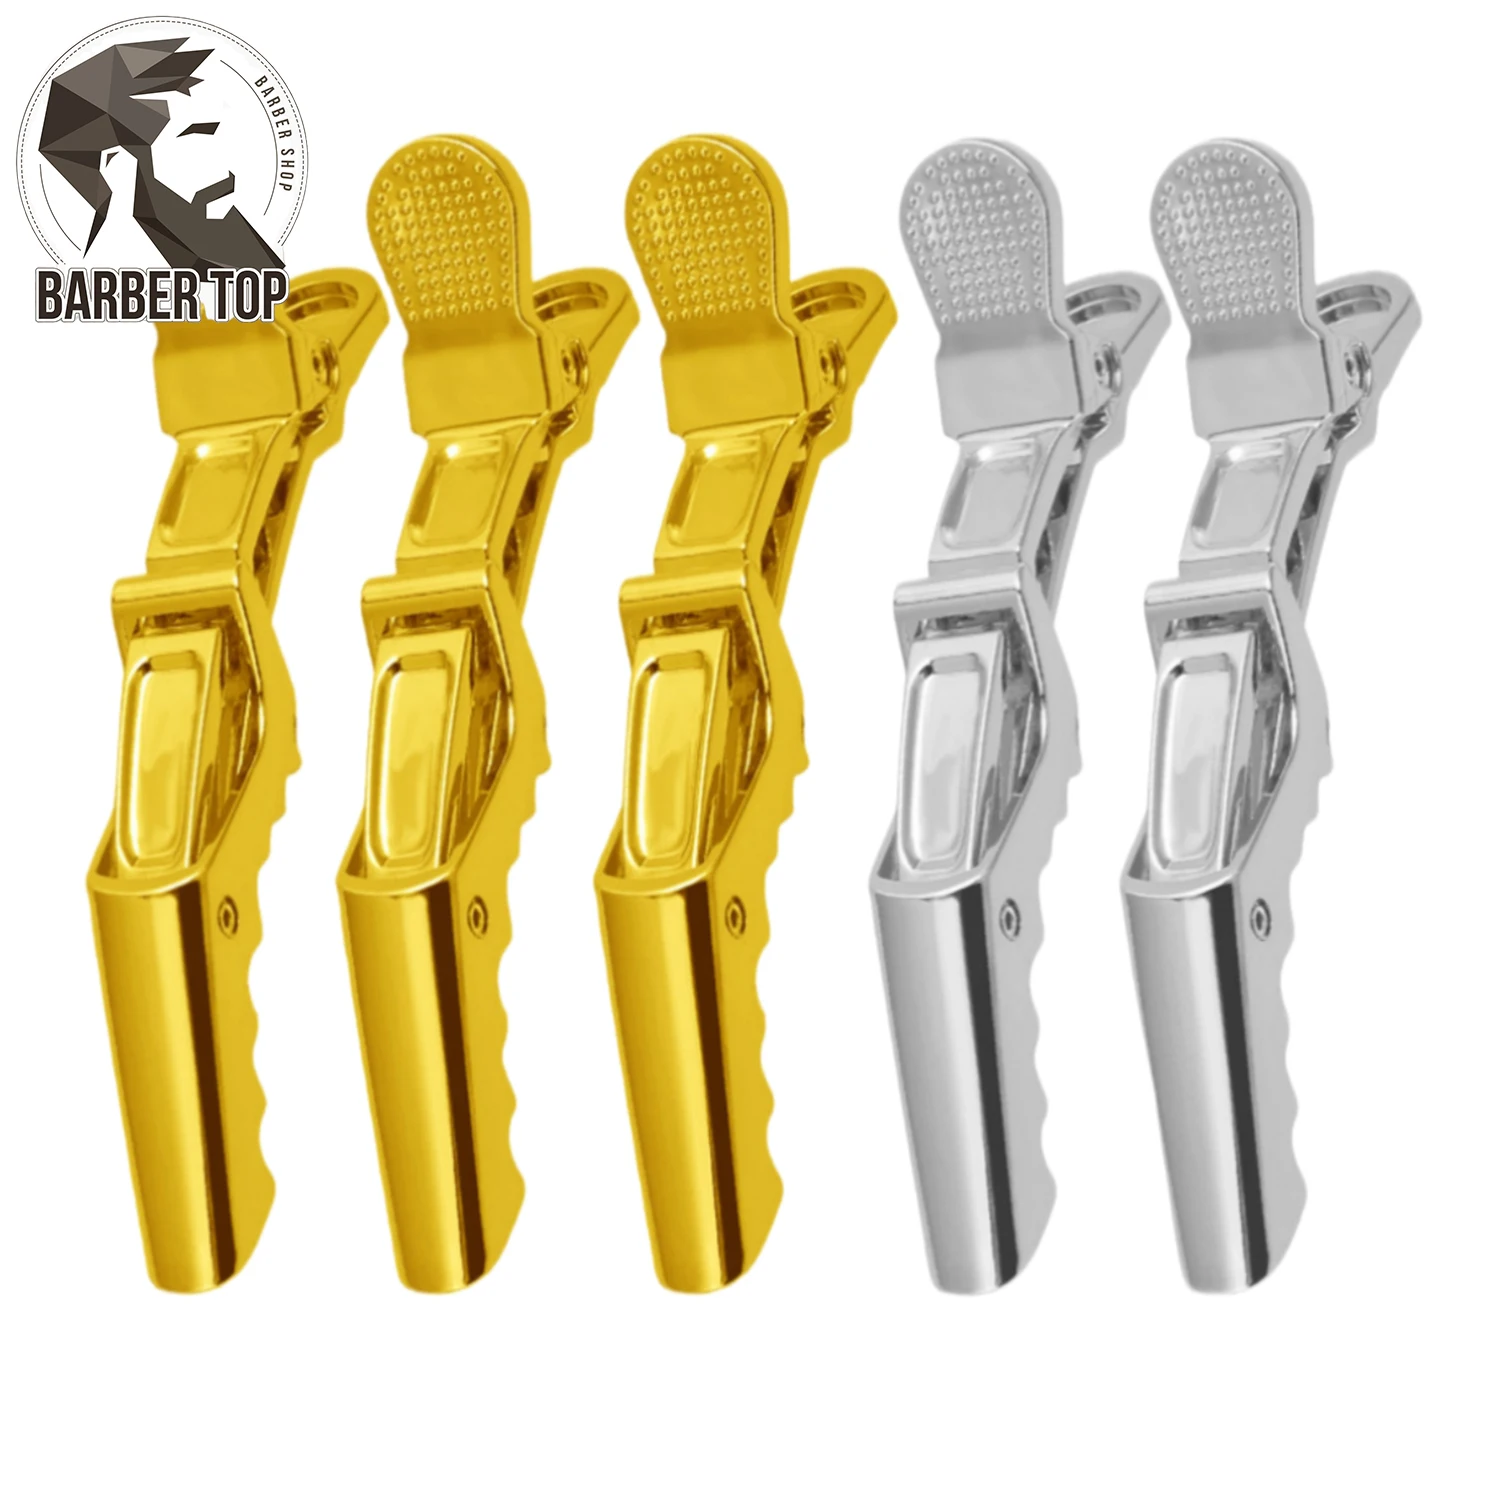 

5pcs Golden Sliver Hair Clip Crocodile Plastic Clamps Claw Alligator Clips Barber Styling Hairpins Hairdressing Accessories